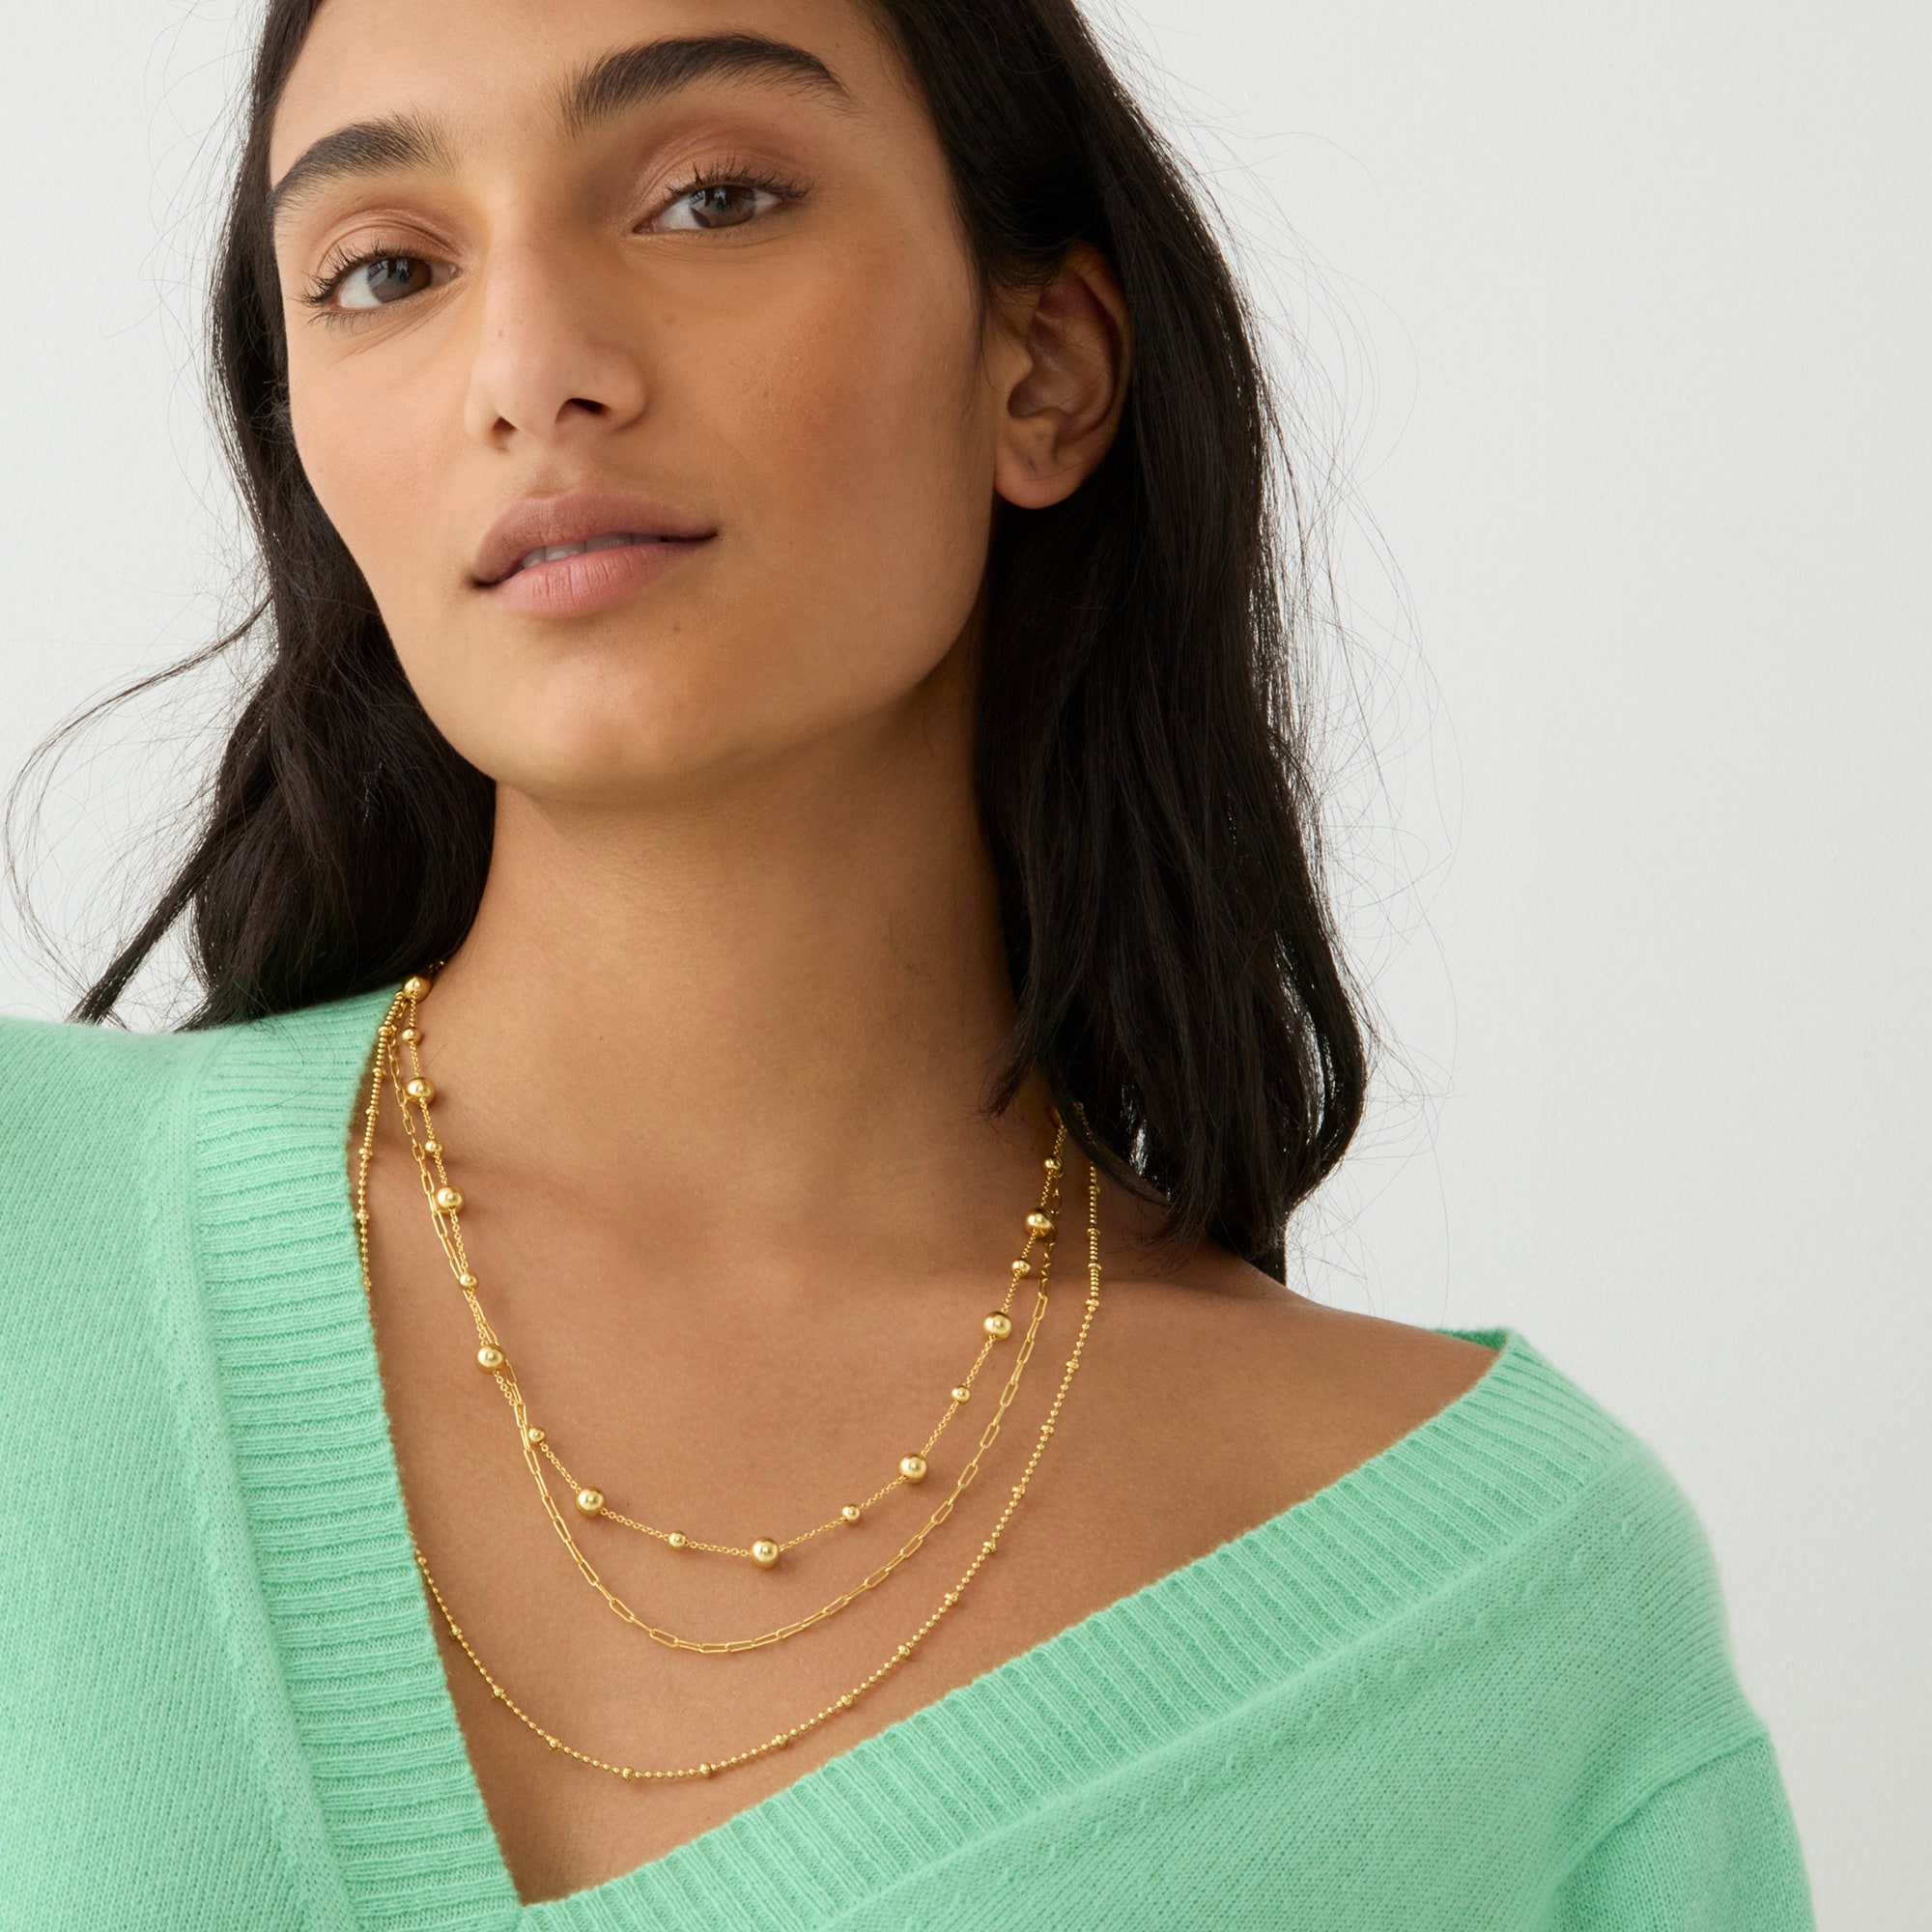  Dainty gold-plated layered necklace